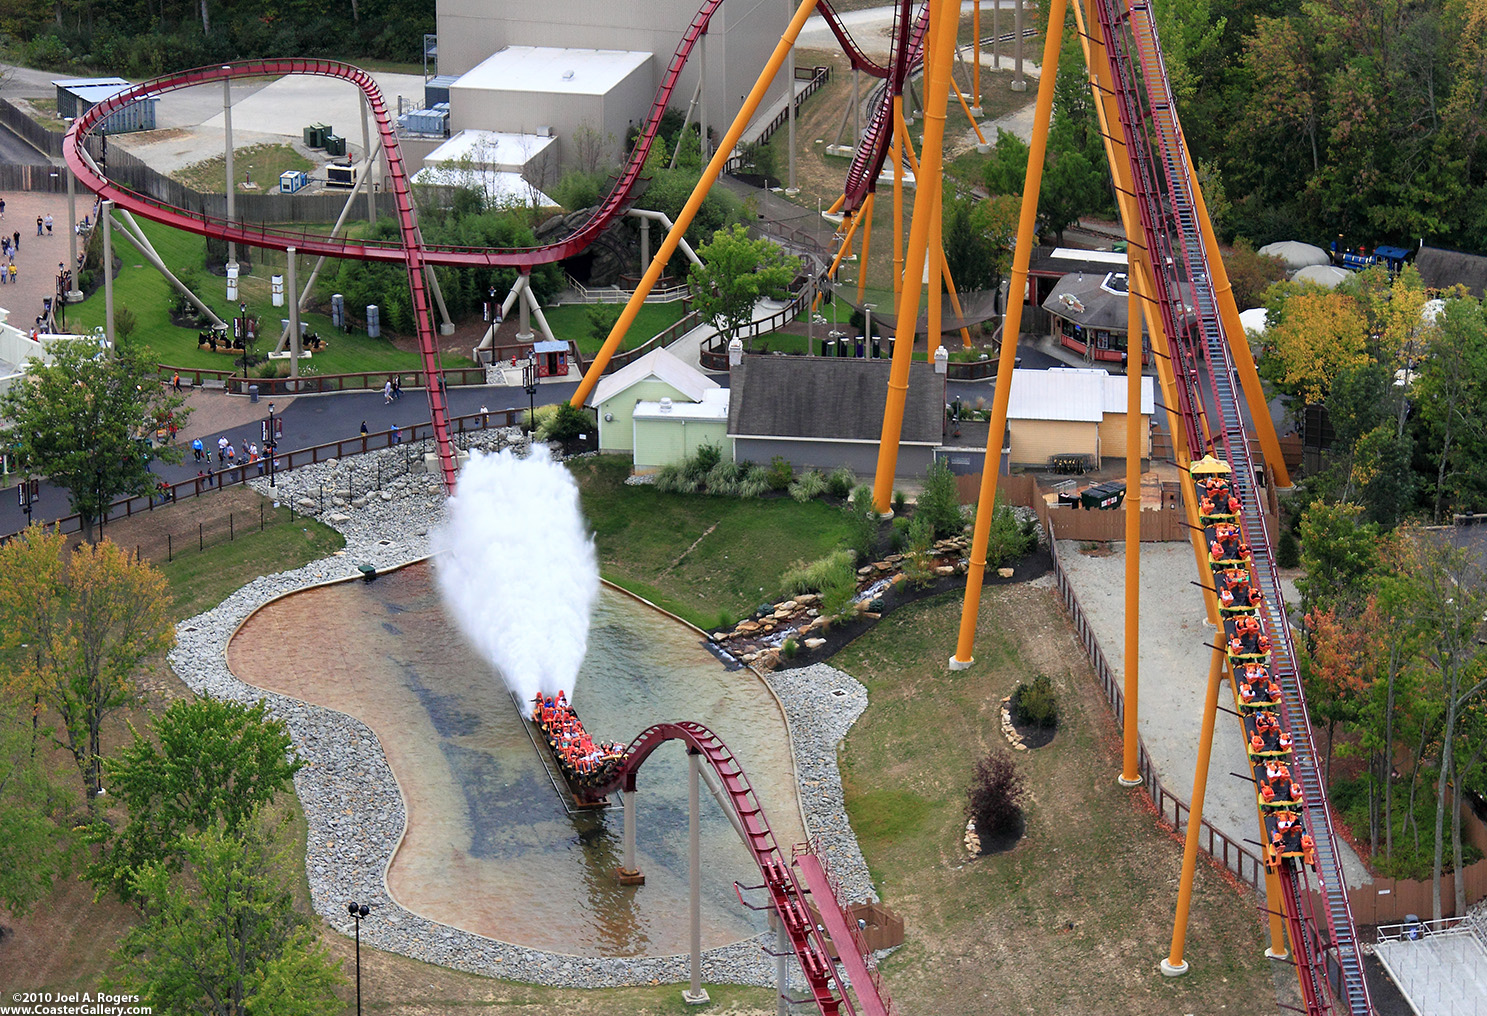 Roller coaster going through the water